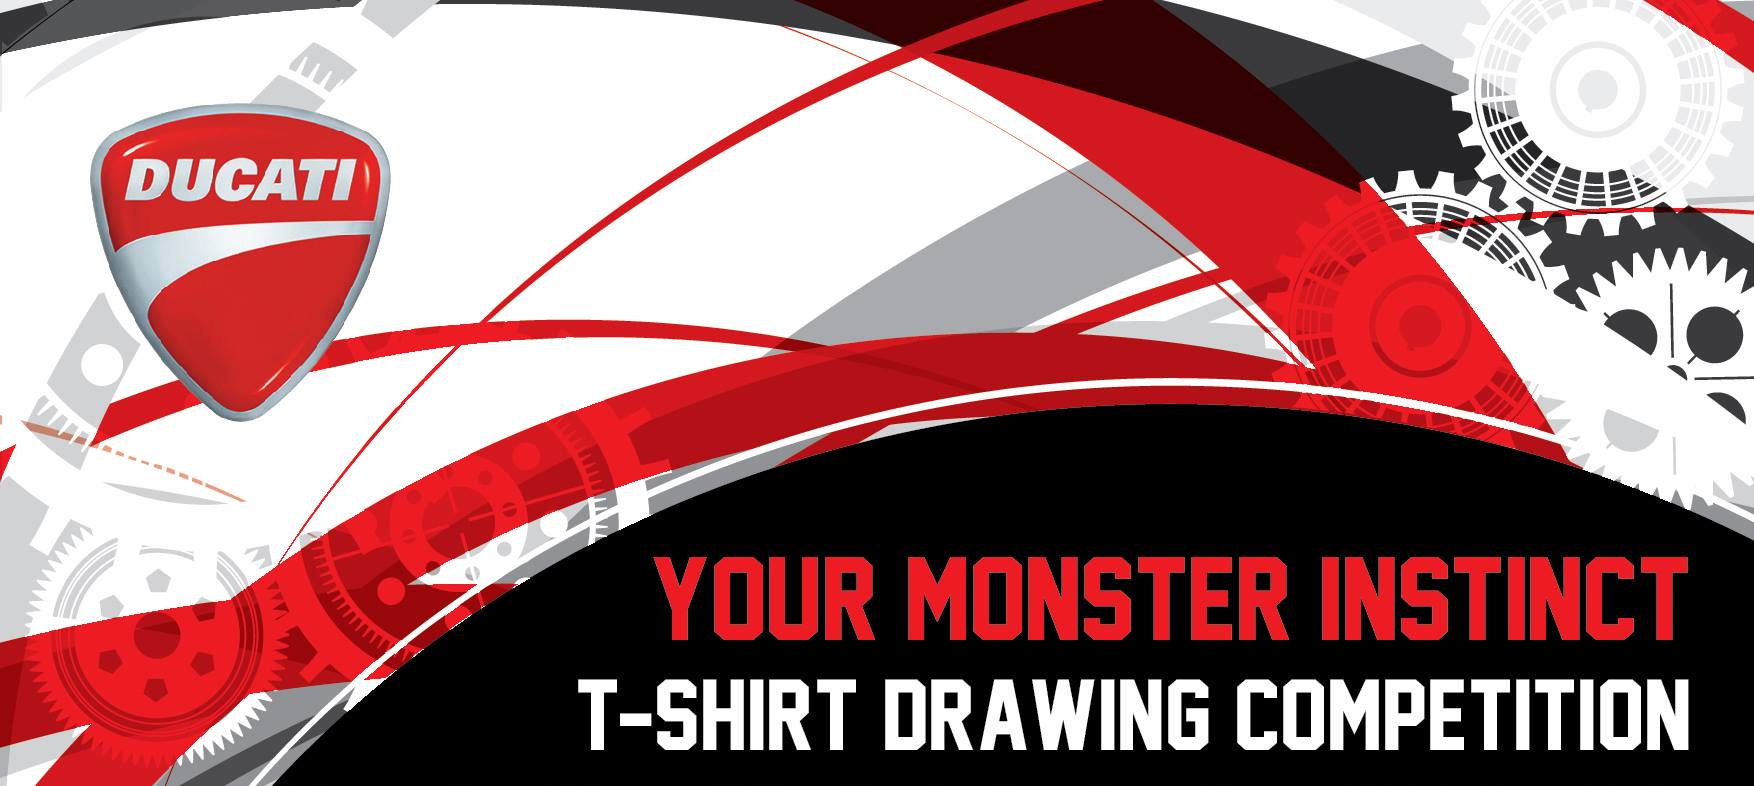 2014 ducati Your Monster Instinct T-shirt Drawing Competition